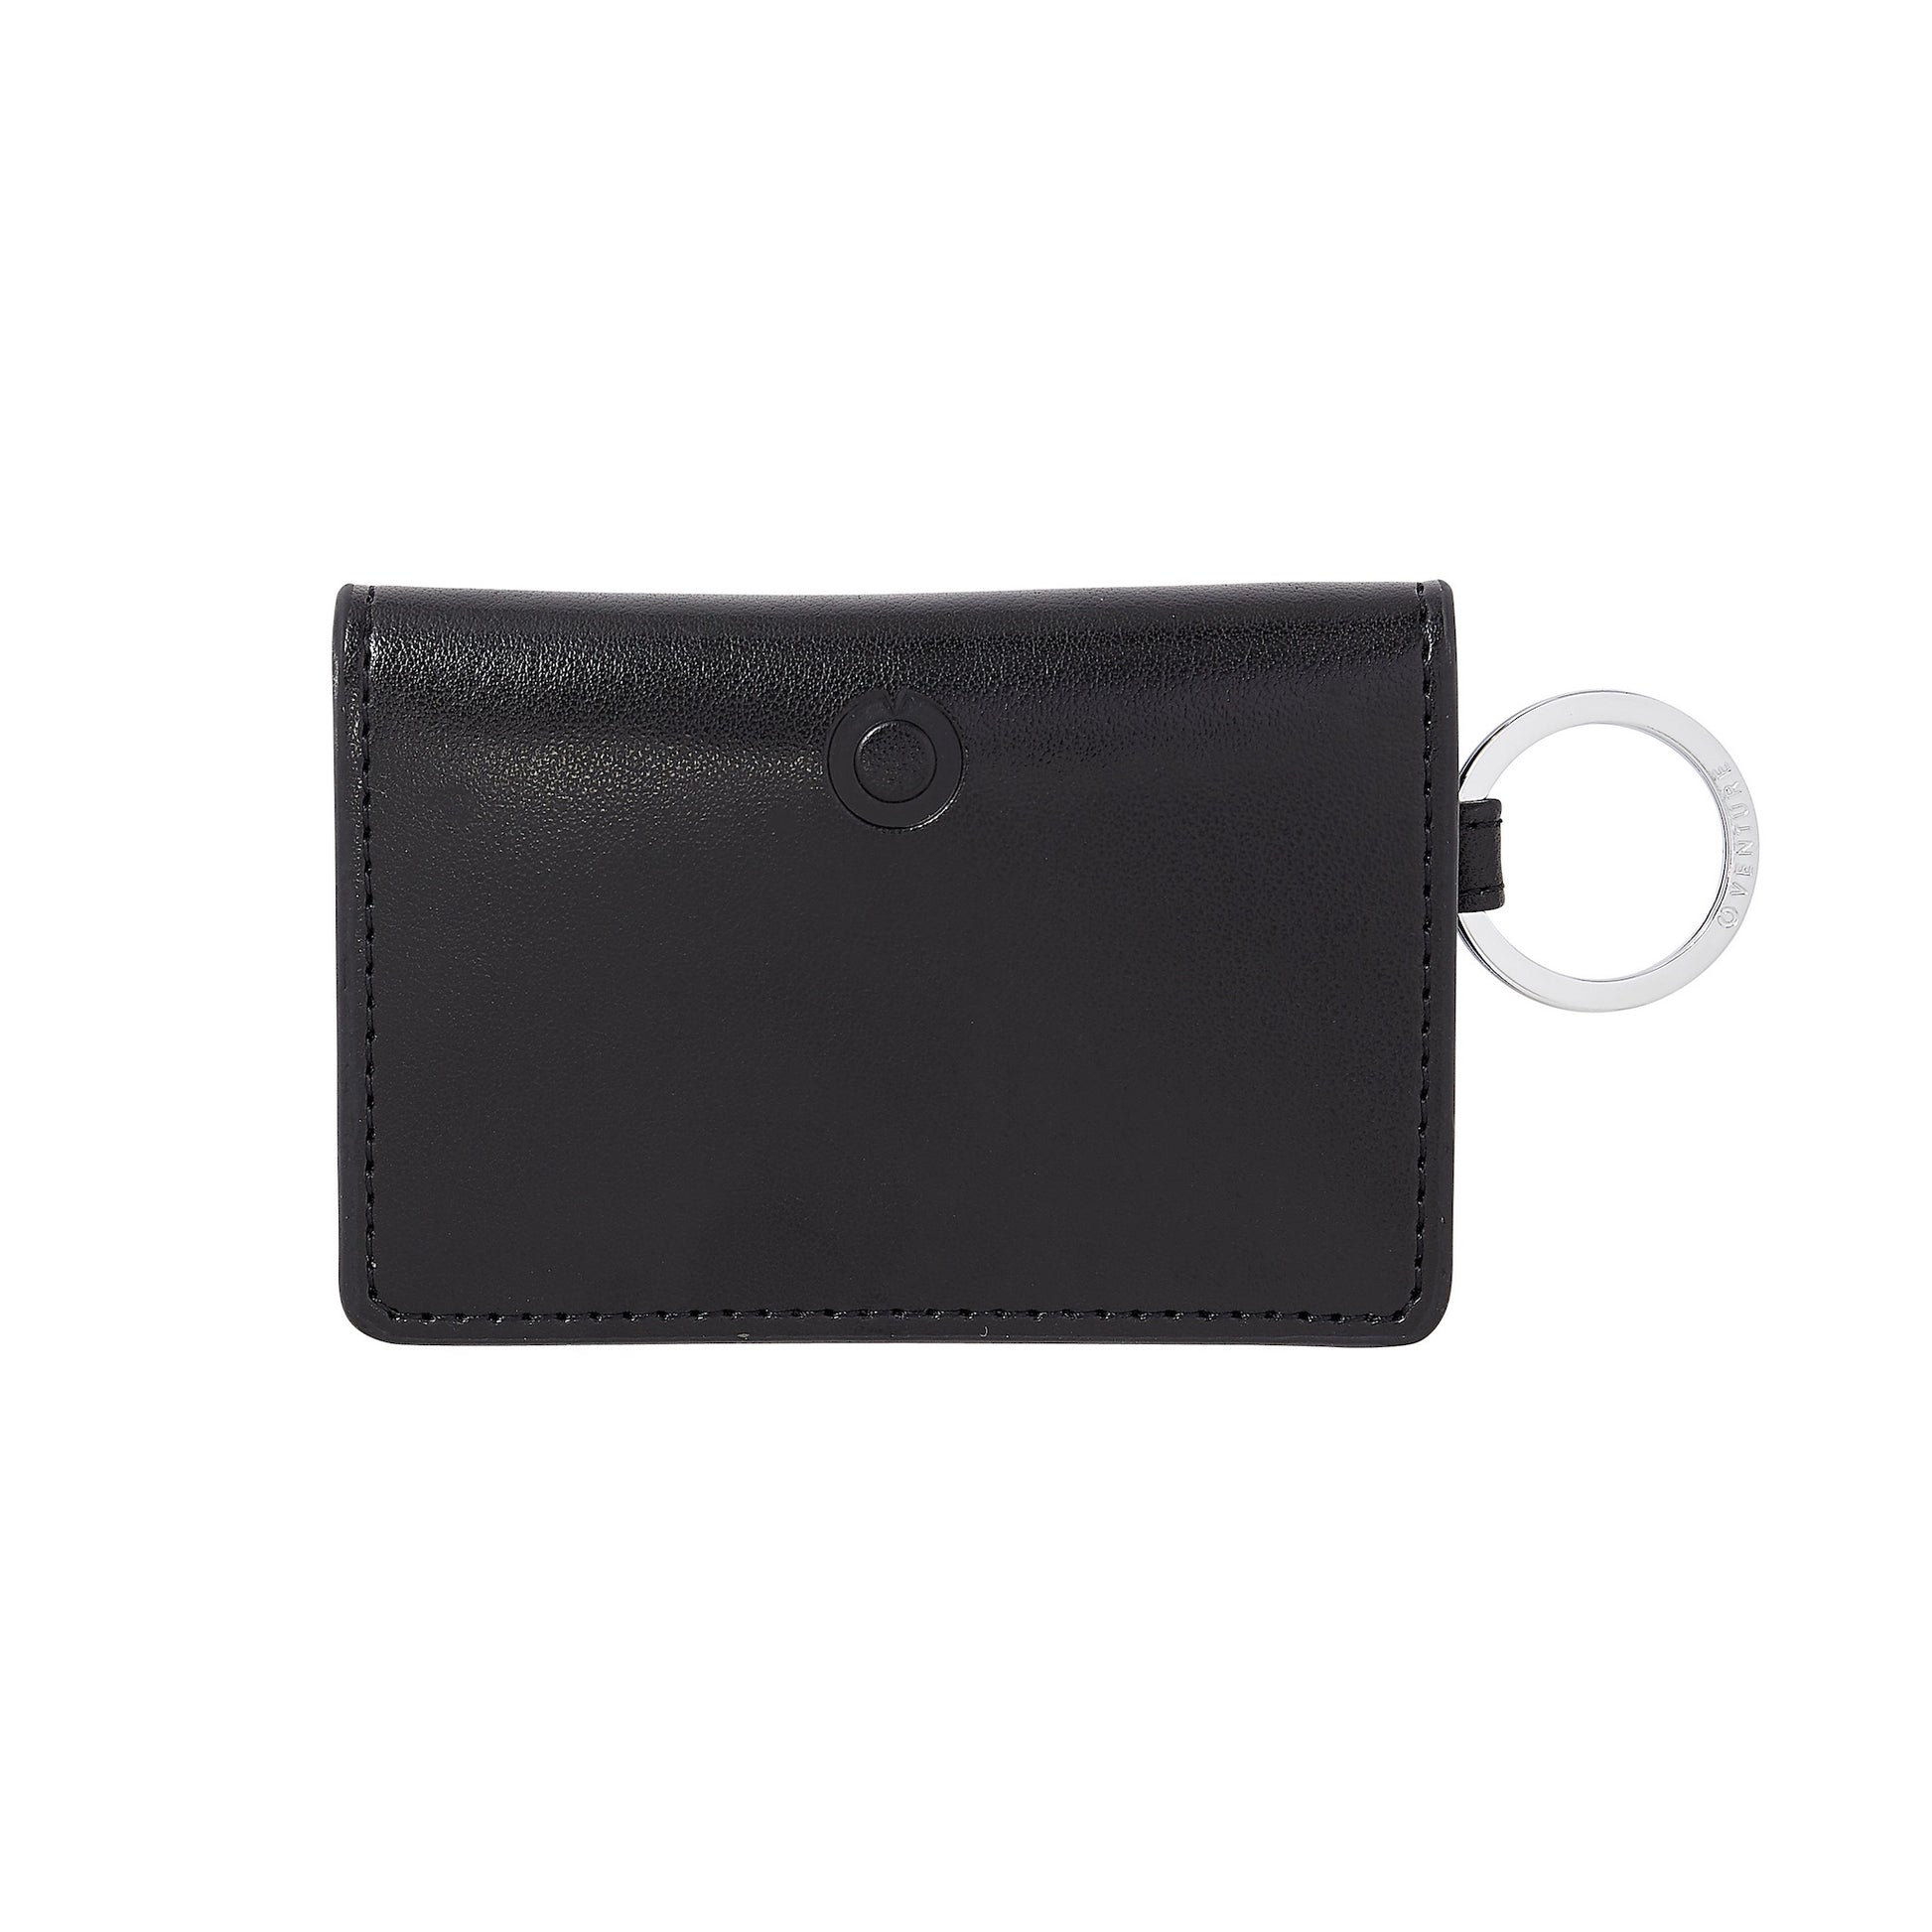 Black leather bifold keychain wallet with compartments.